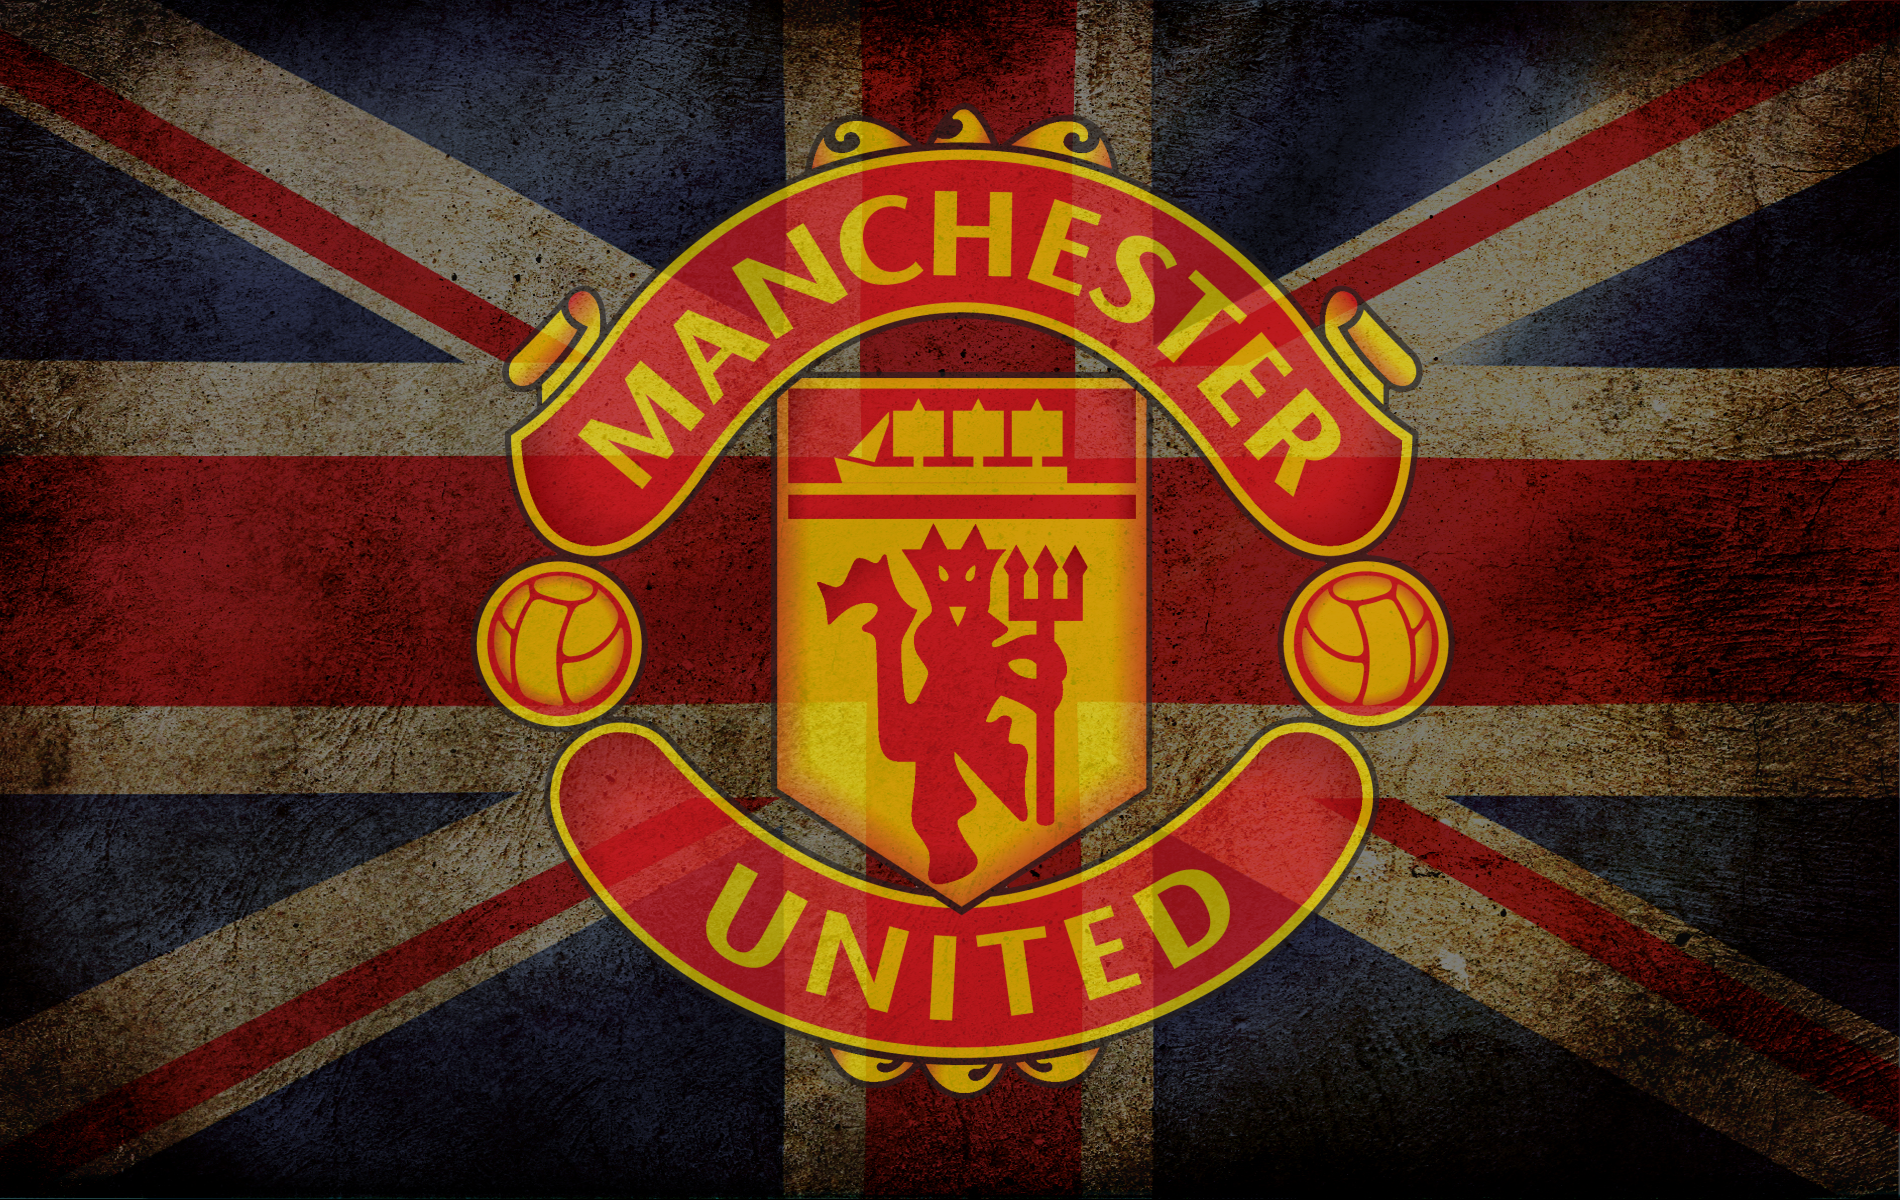 manchester-united-front-png.6